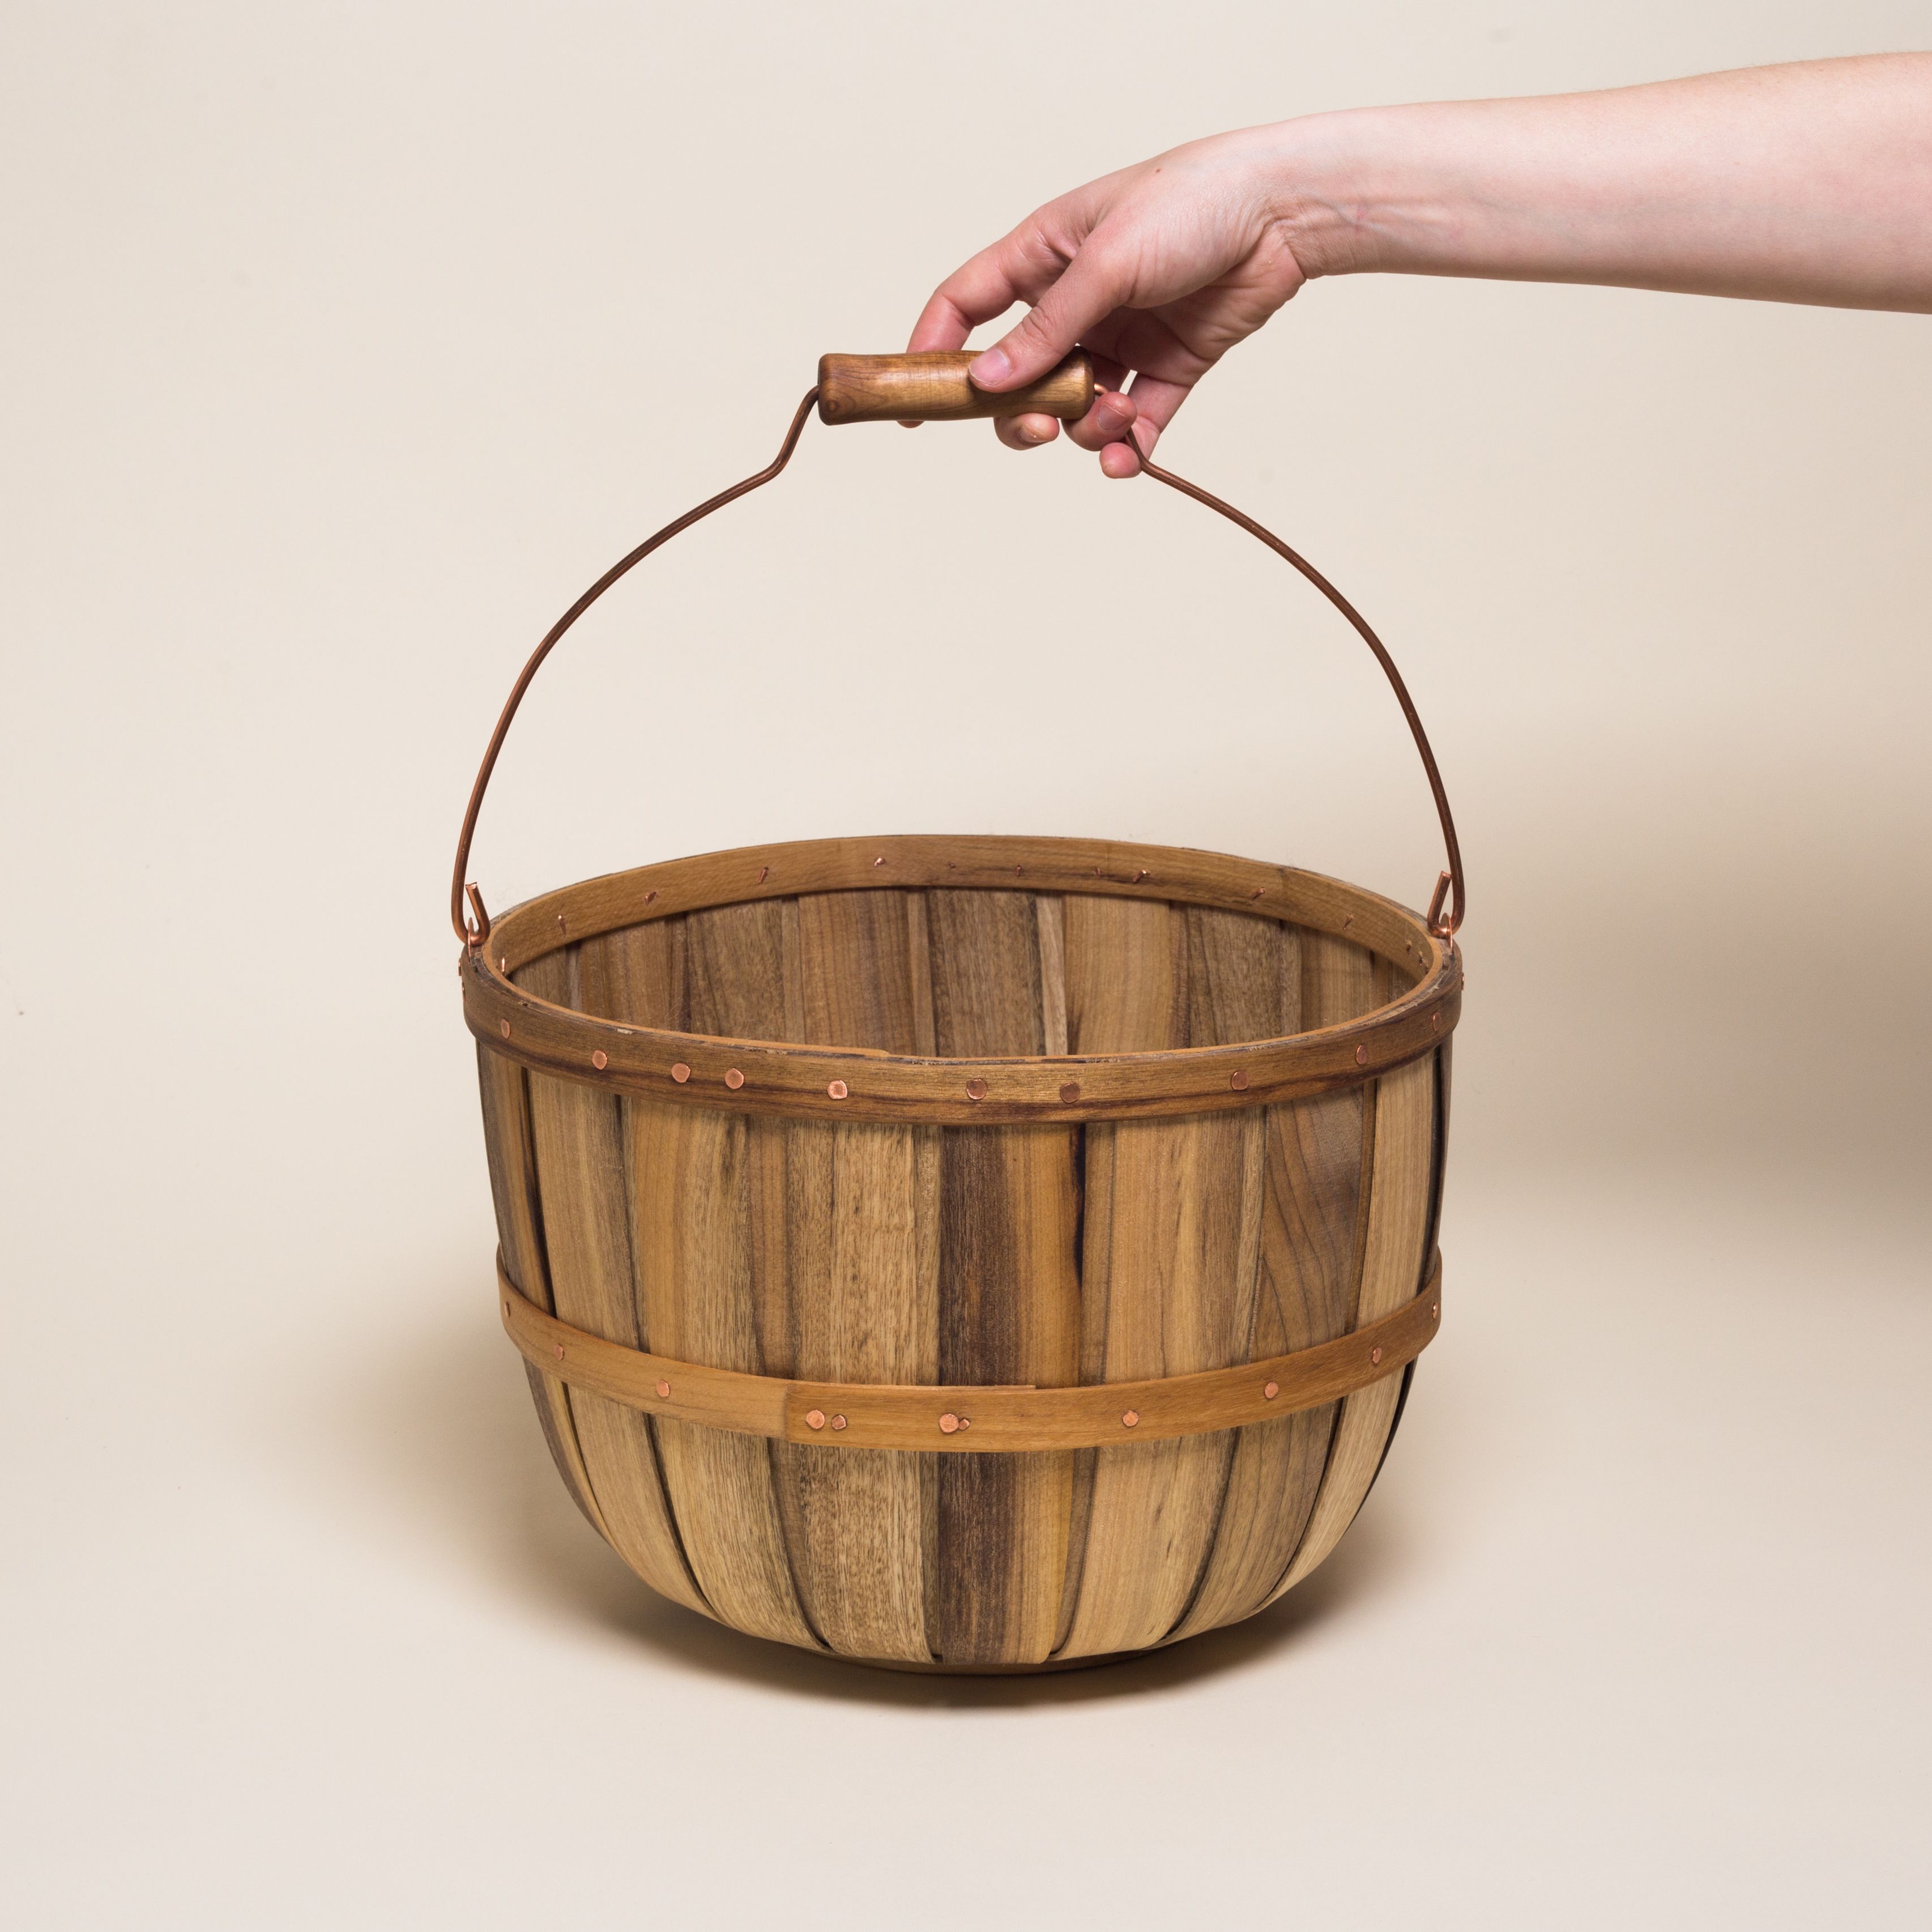 Baskets made of wood with a metal handle